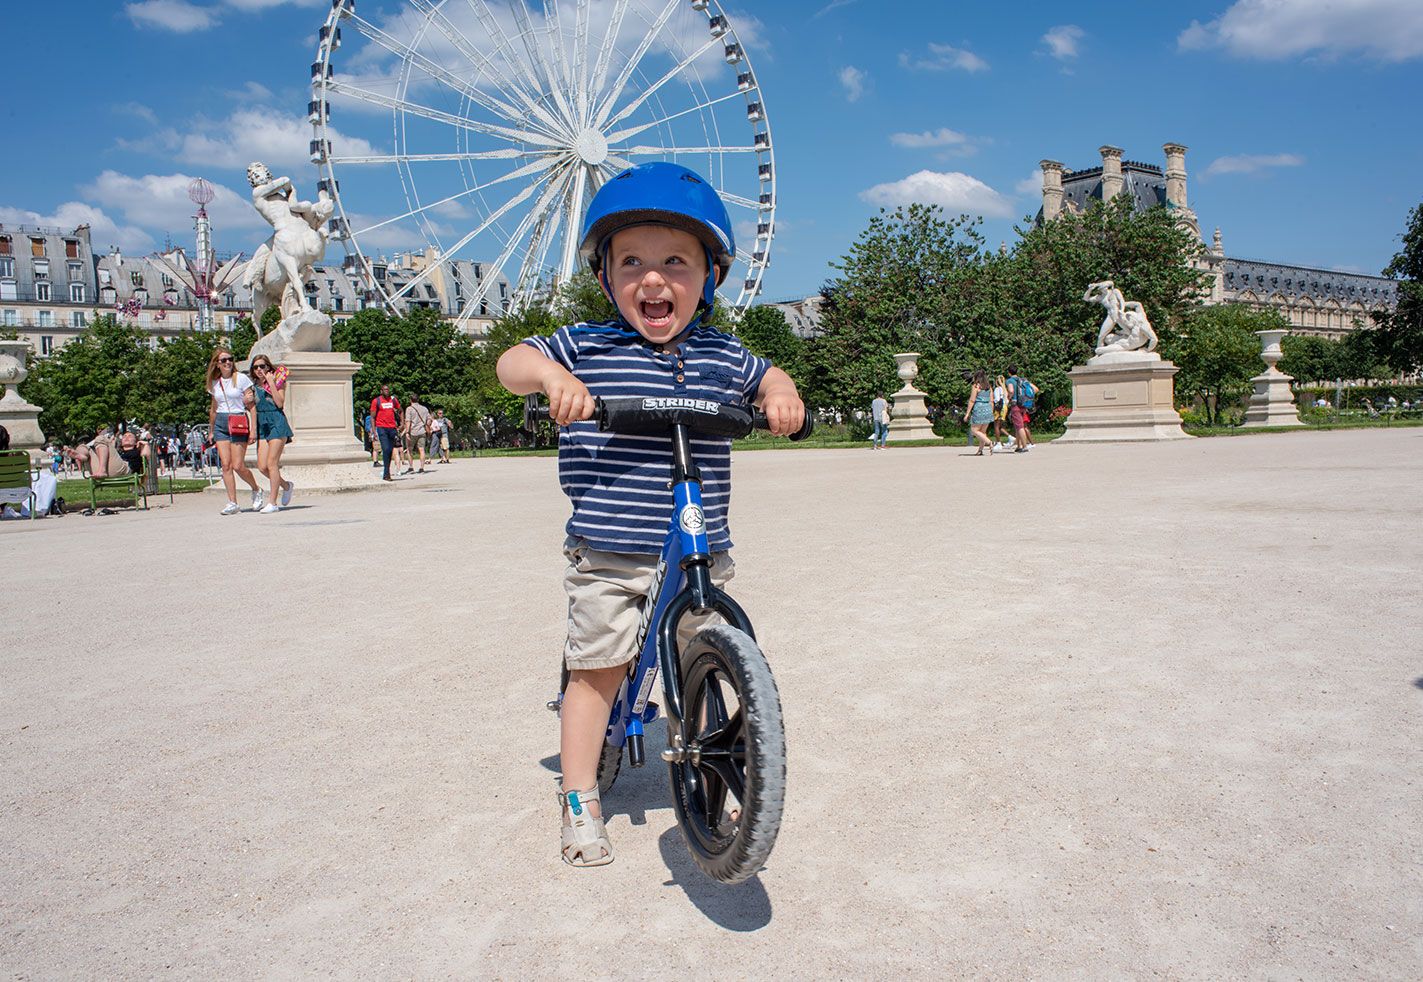 A little boy does a wheelie on his blue Strider 12 inch Sport balance bike in front of the ferris wheel outside the Tuileries Garden in Paris, France